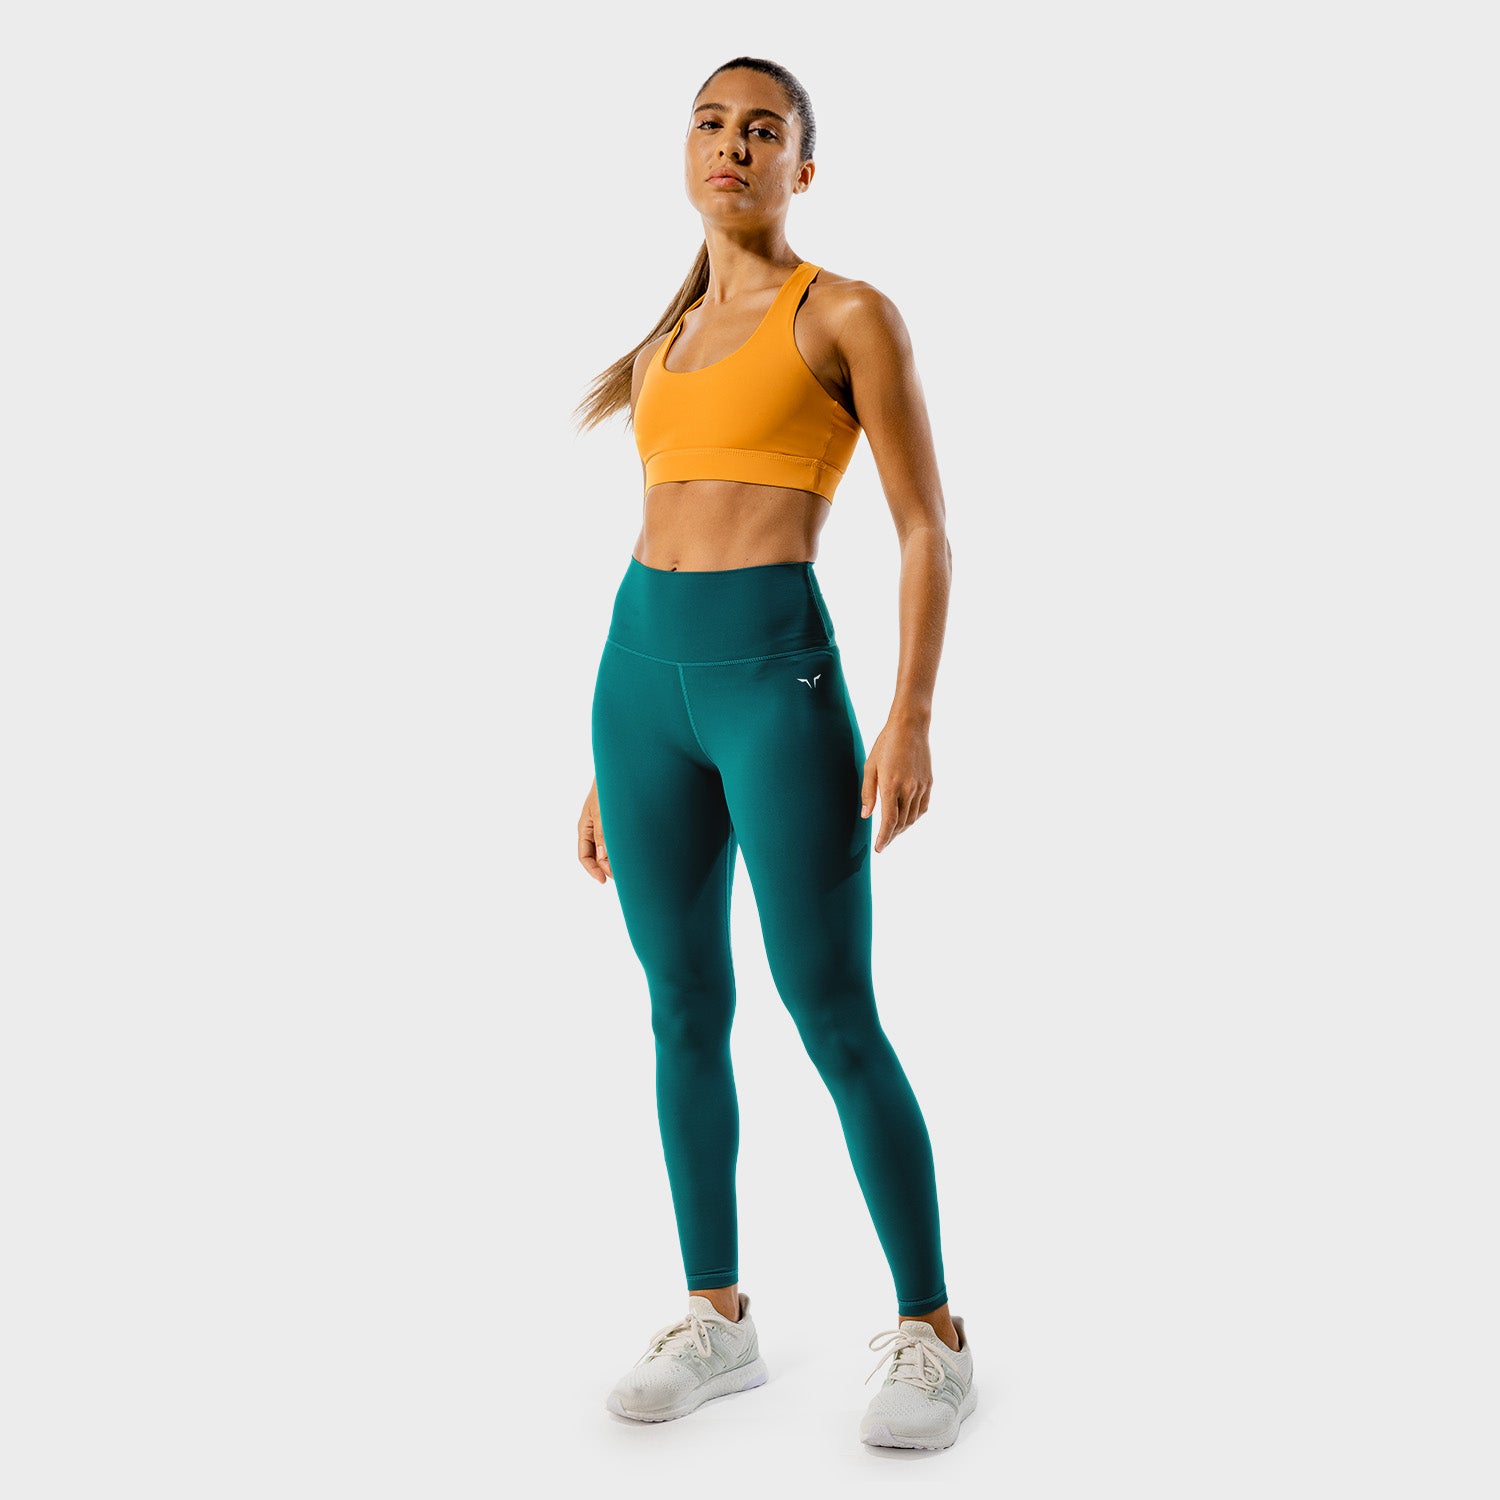 squatwolf-workout-clothes-core-agile-bra-yellow-sports-bra-for-gym